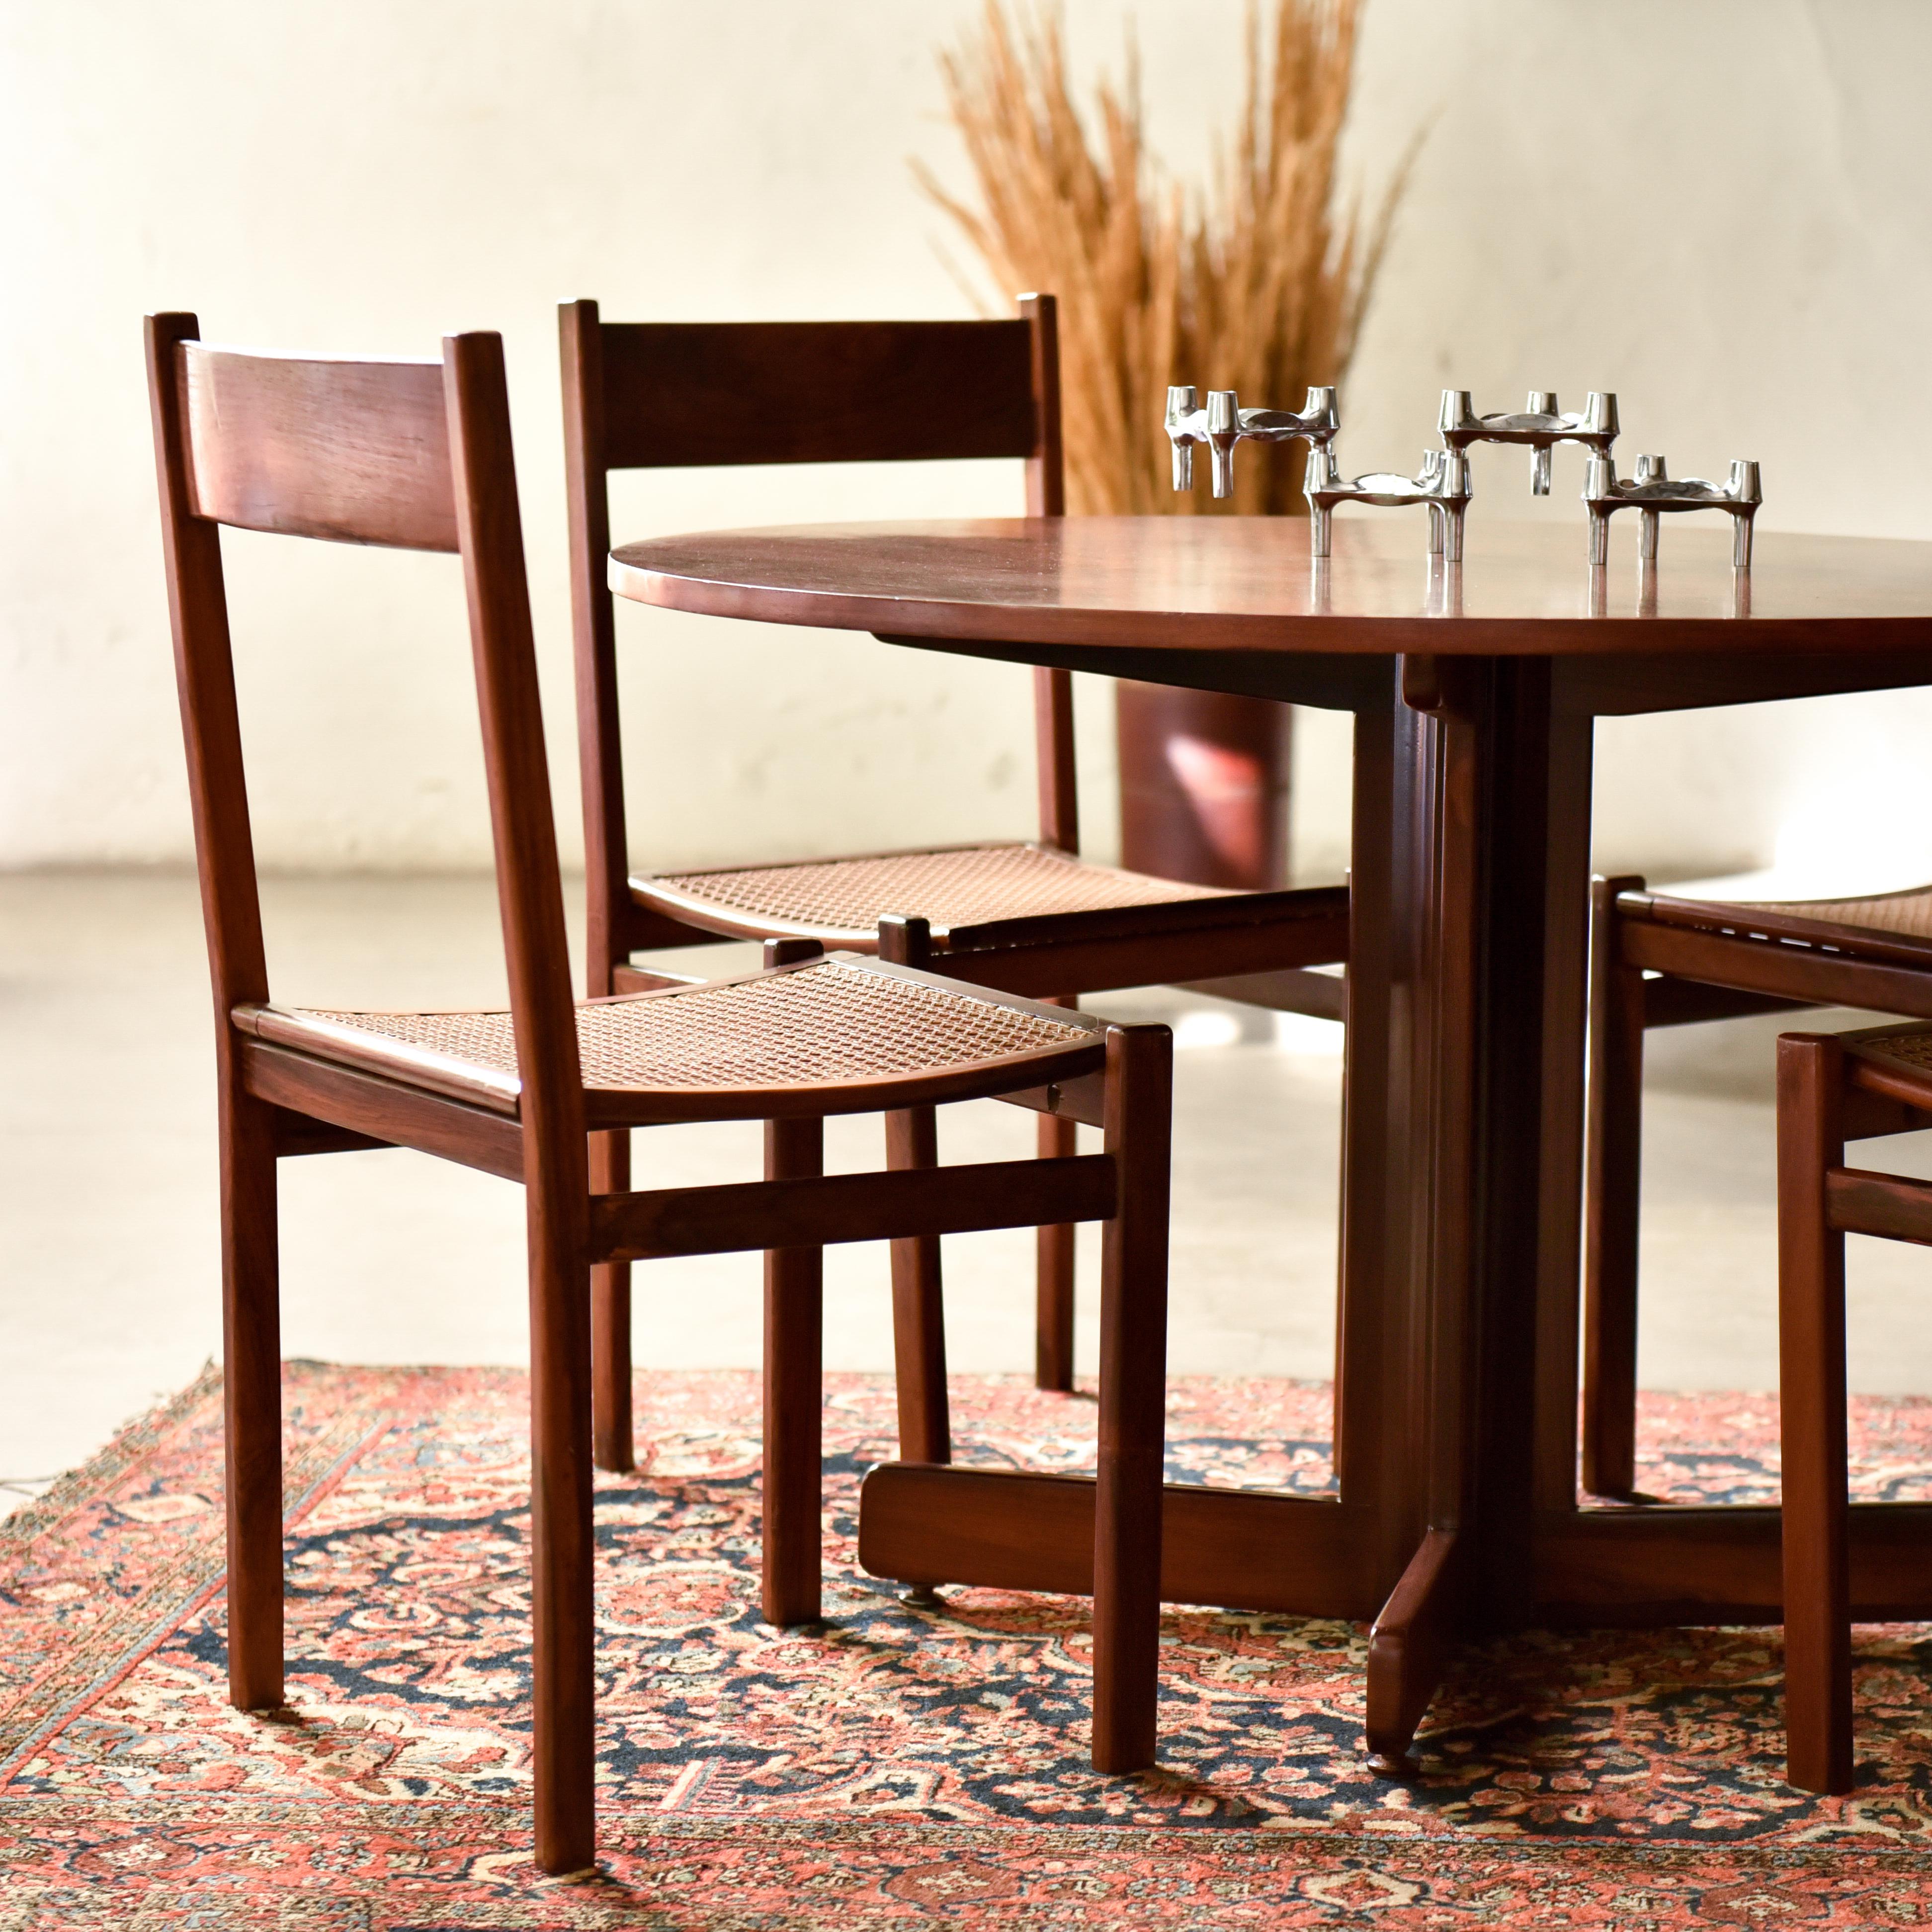 Mid-20th Century Set of 6 Chairs in Brazilian Wood by Joaquim Tenreiro For Sale